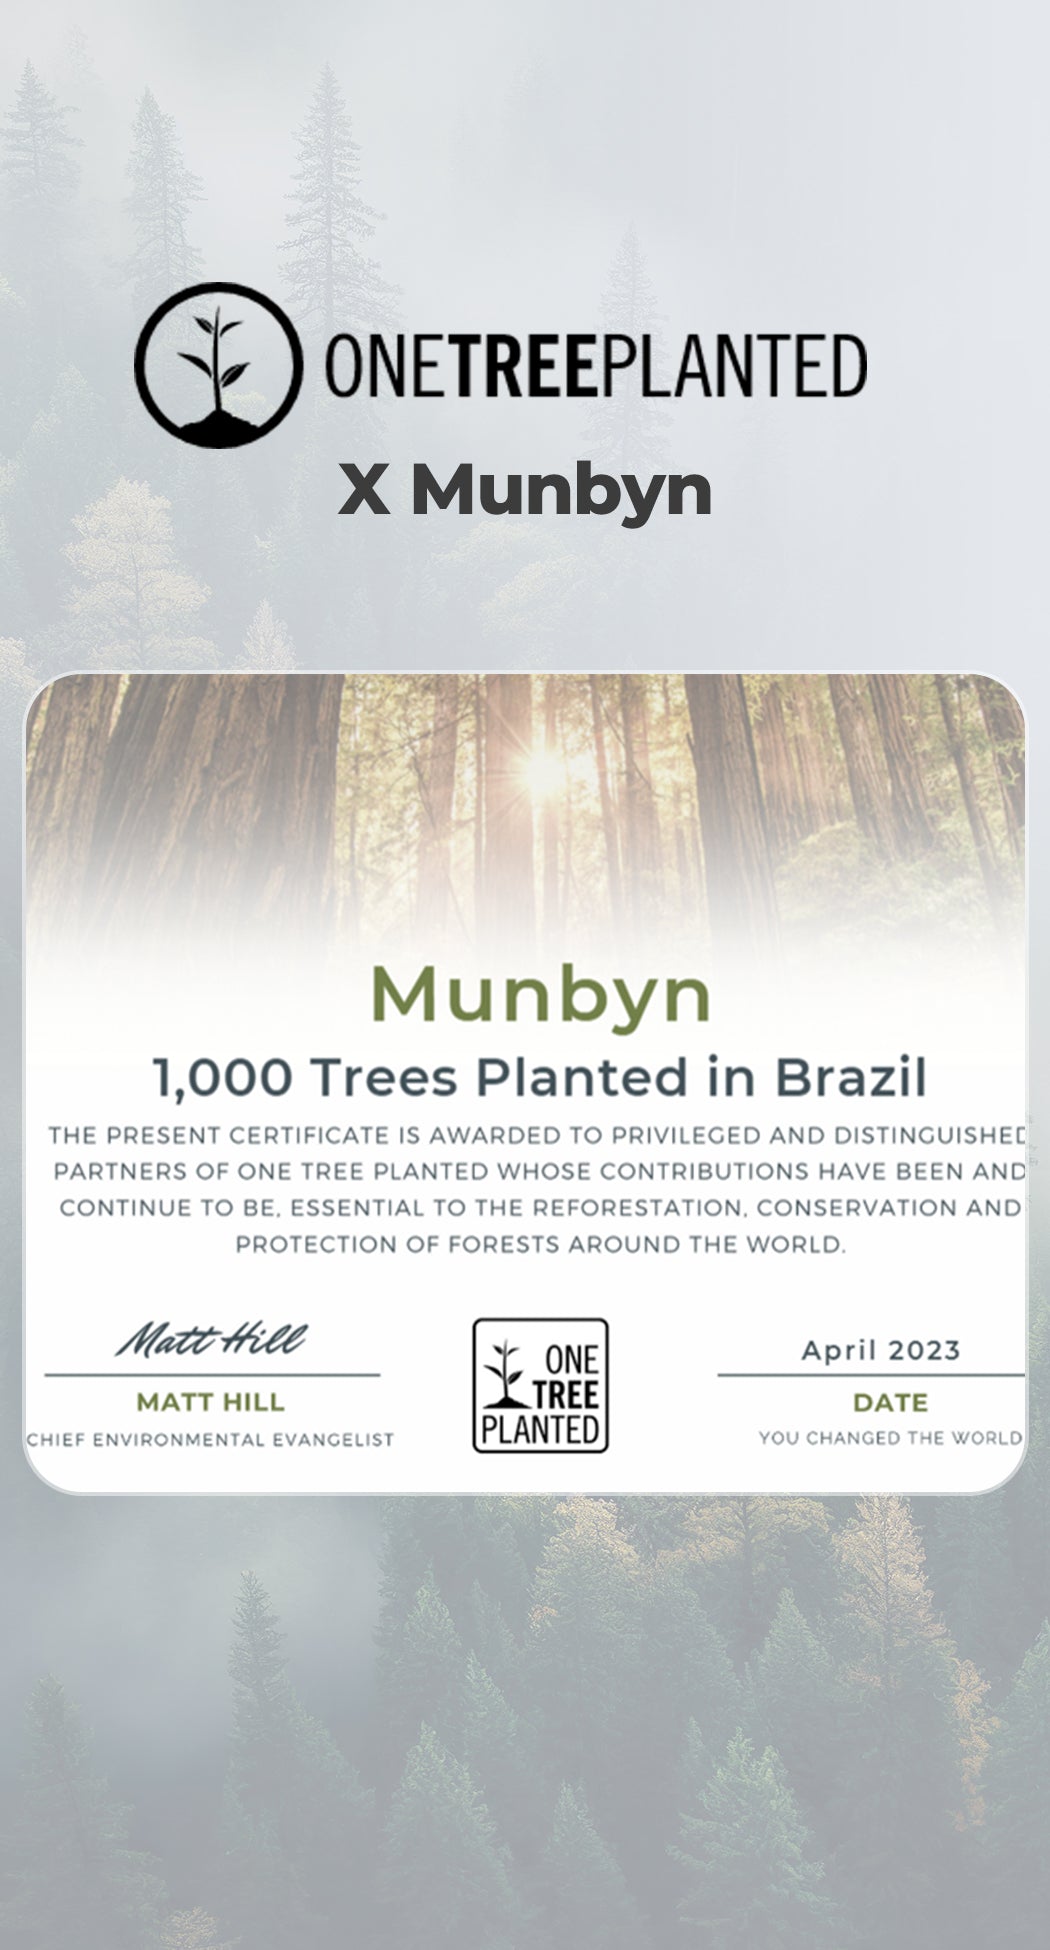 MUNBYN promotes energy conservation, cost savings, and environmental sustainability.